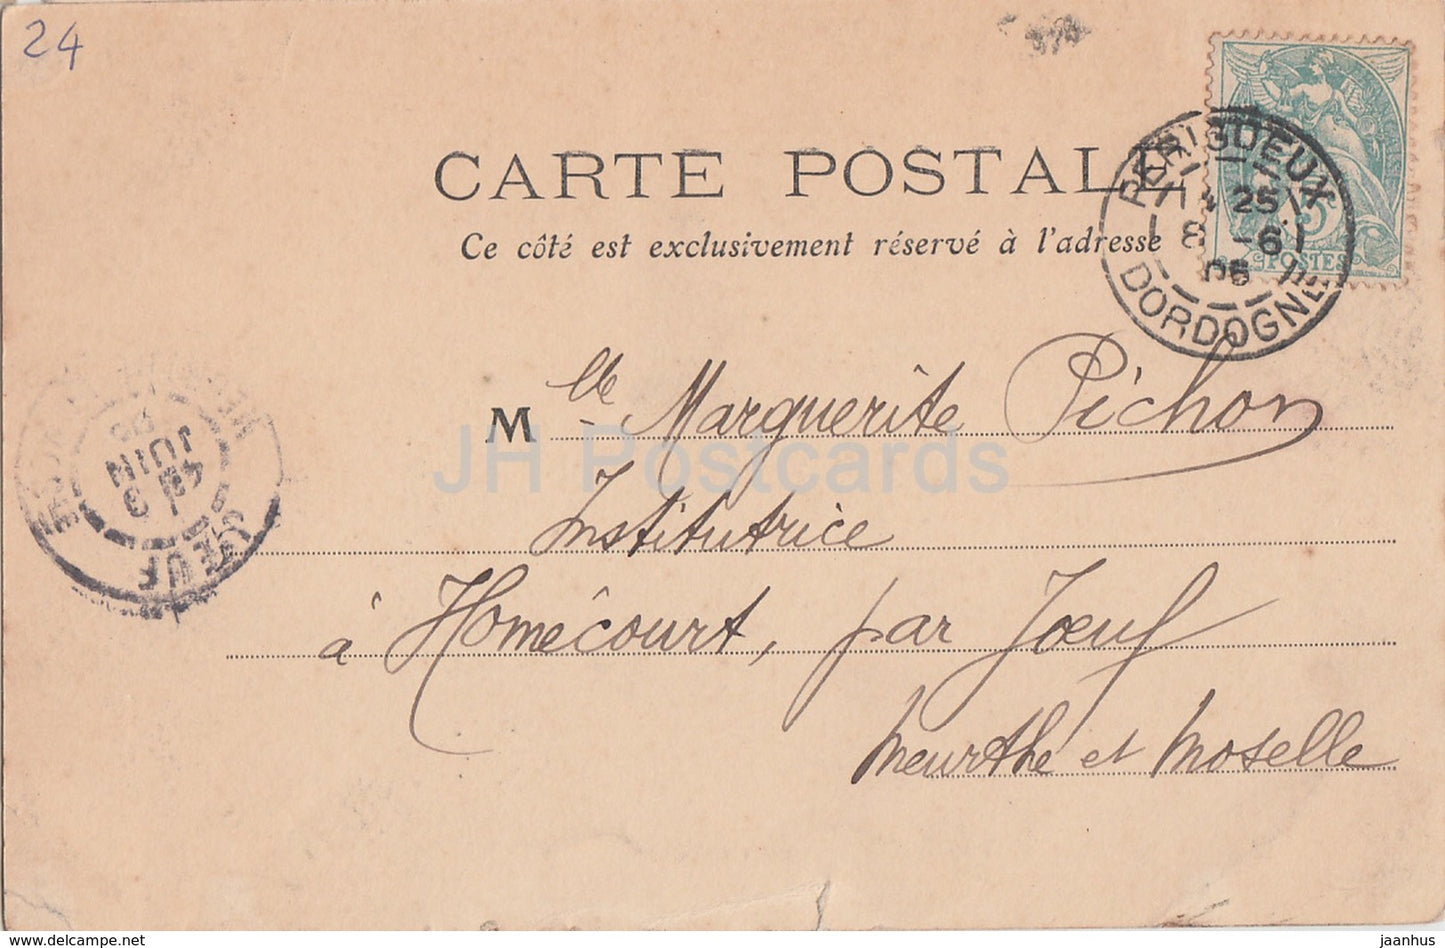 Perigueux - Dordogne - Entree de la Cathedrale St Front - cathedral - 61 - old postcard - 1906 - France - used